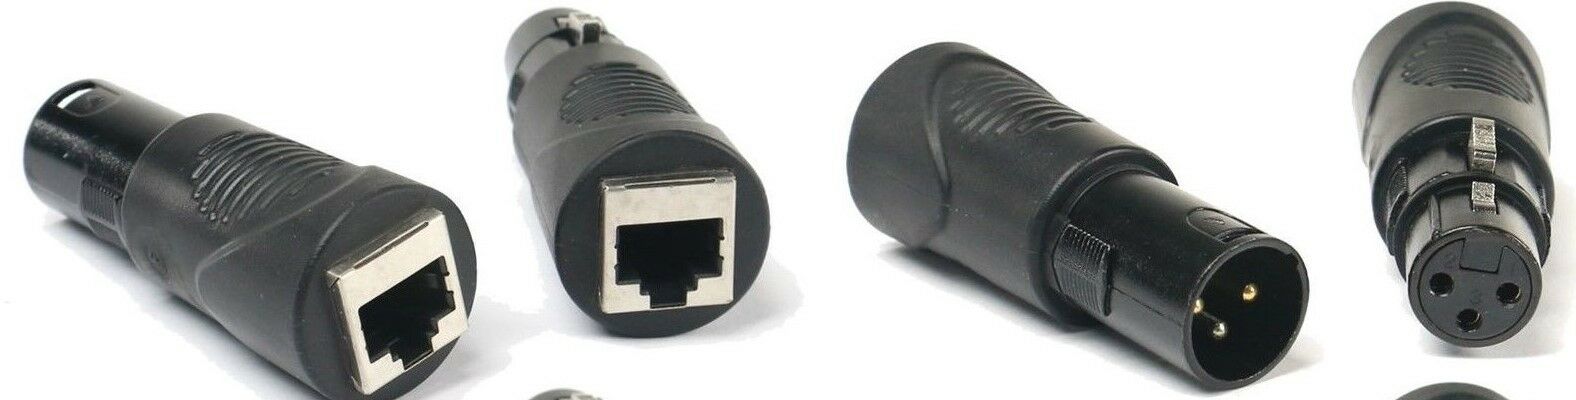 (2) RJ45 Ethernet to 3 Pin XLR DMX Female & Male Adapter Sets by VRL